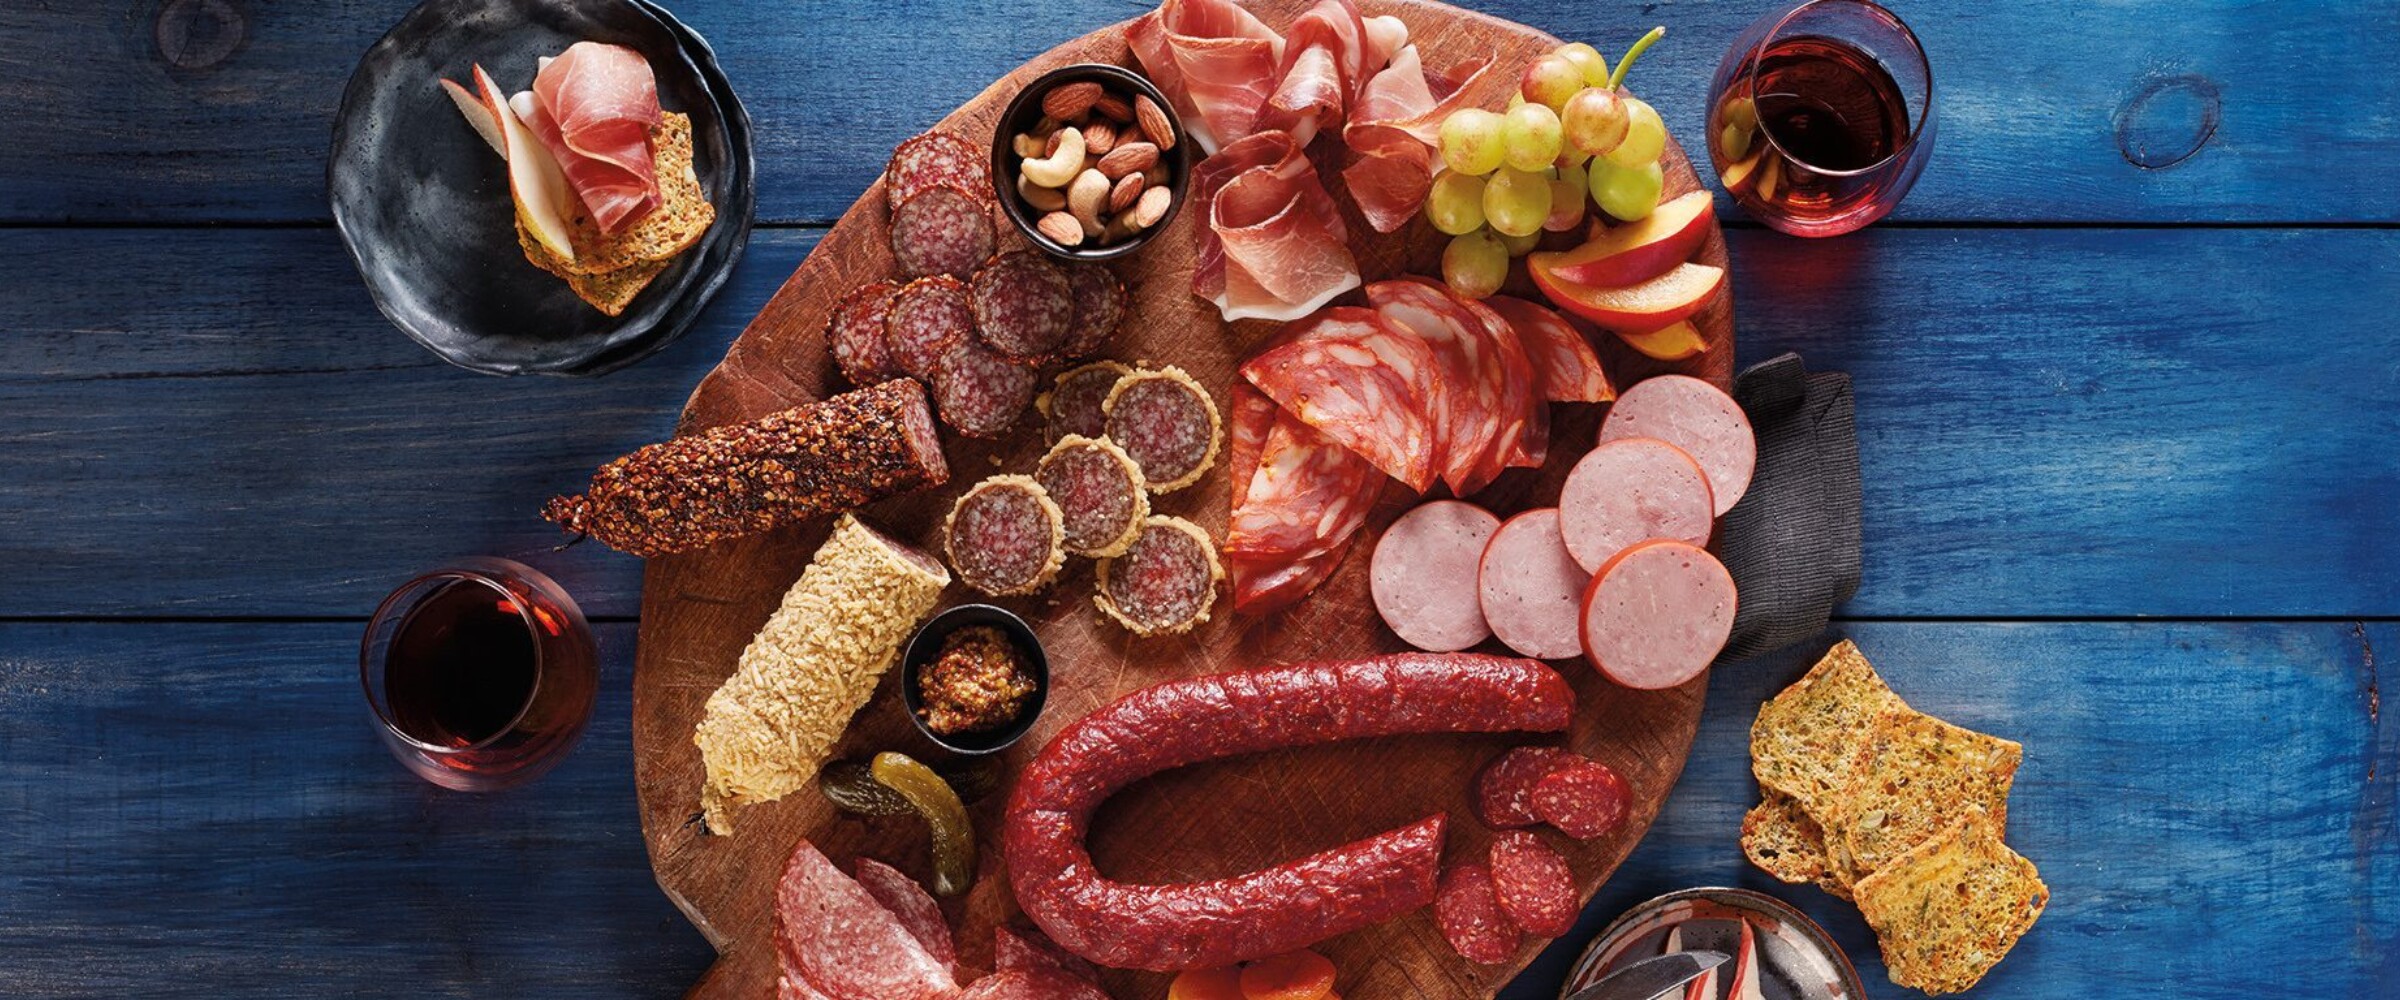 Charcuterie board with meat, fruit and crackers